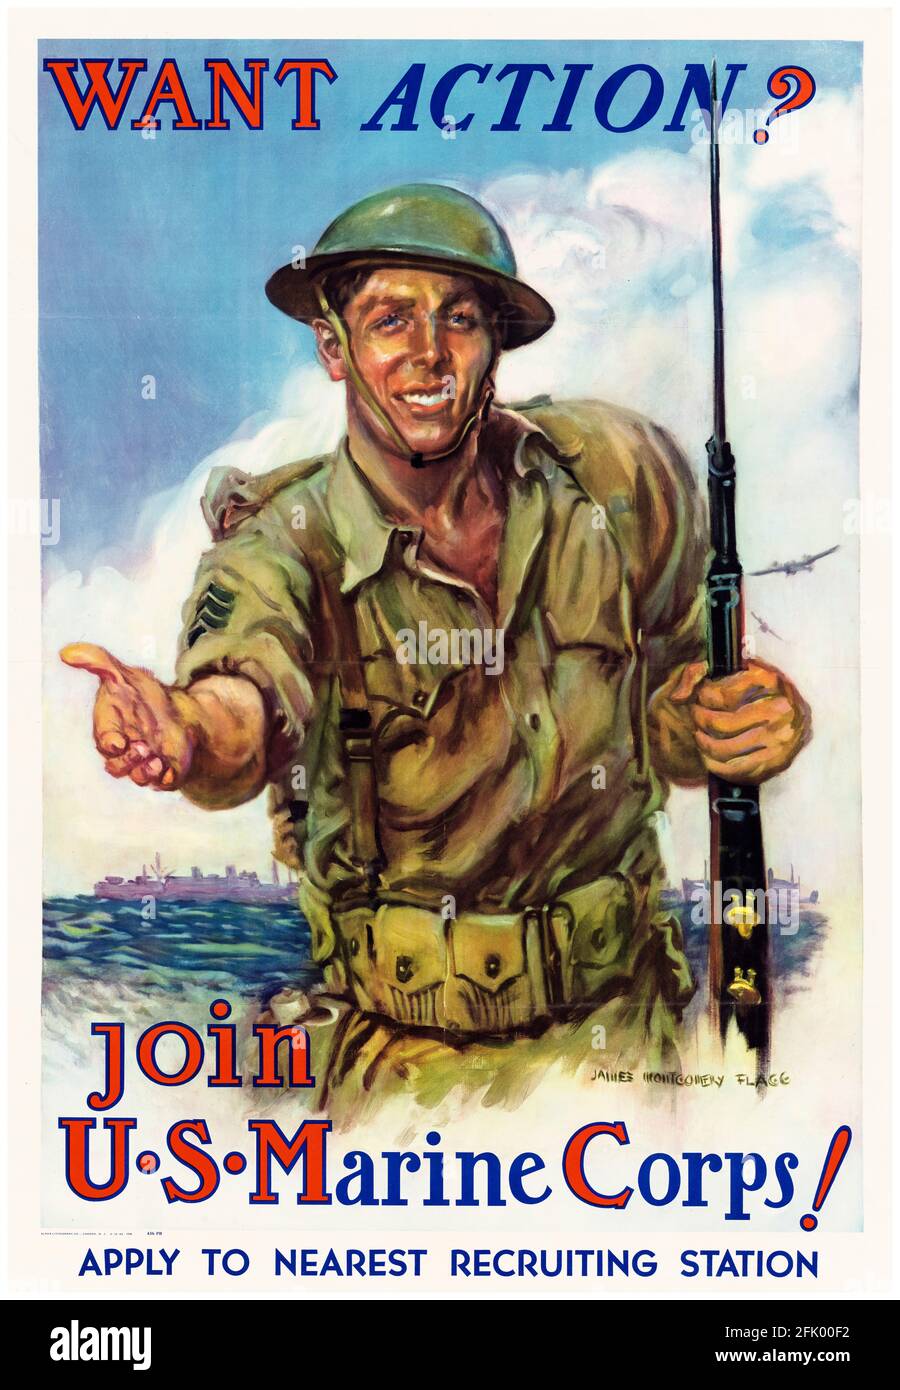 American, WW2 military recruitment poster: Want Action?, Join US Marine Corps! (USMC), 1942-1945 Stock Photo